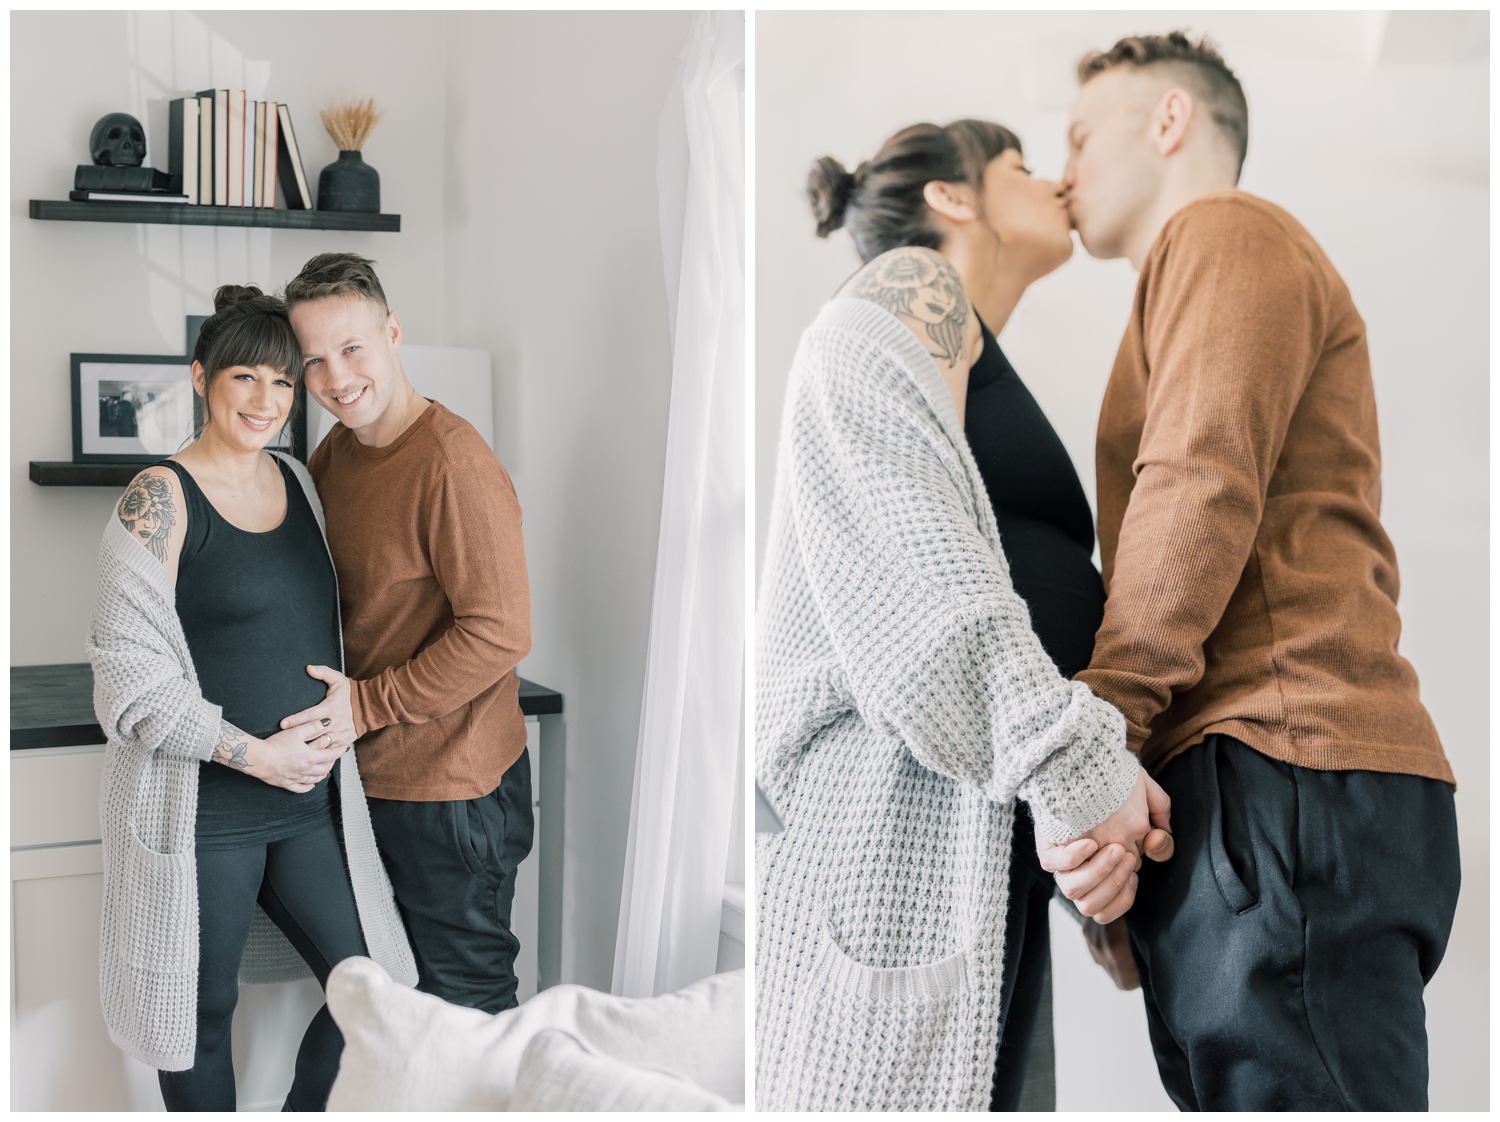 Cozy Maternity Session in Schenectady in the home of the expecting parents.